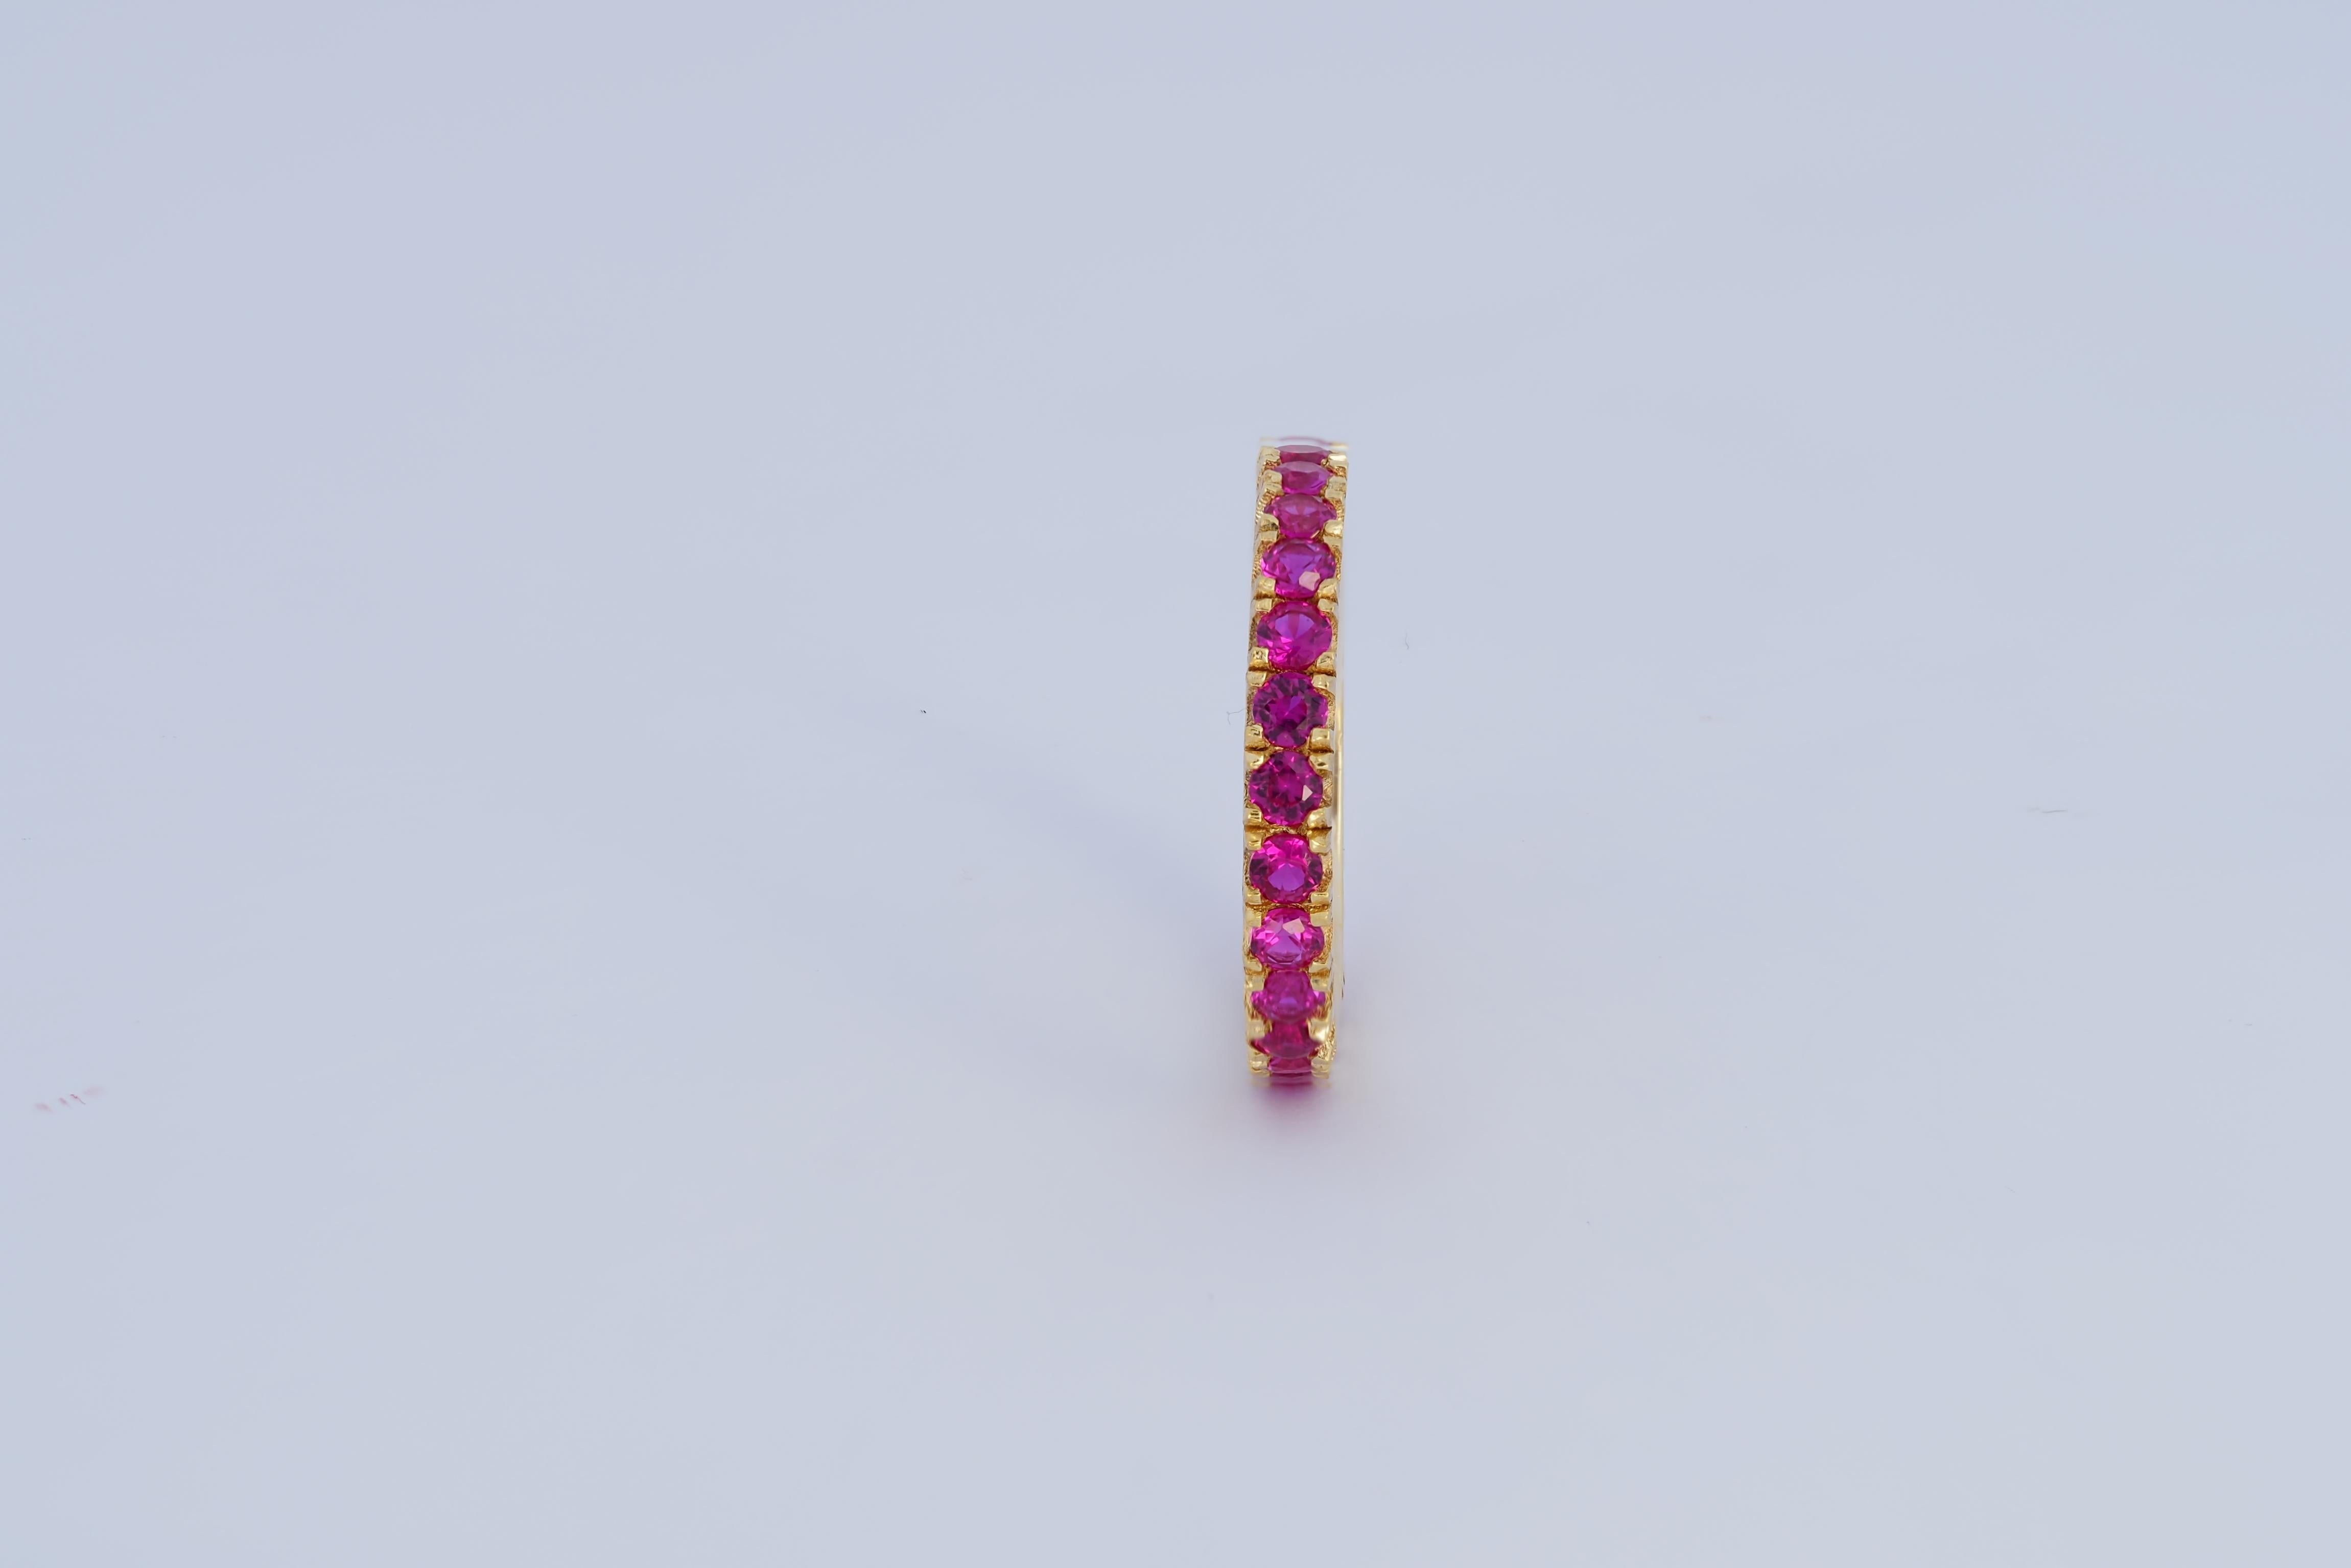 For Sale:  Pinkish red gemstone 14k gold eternity ring band. 11